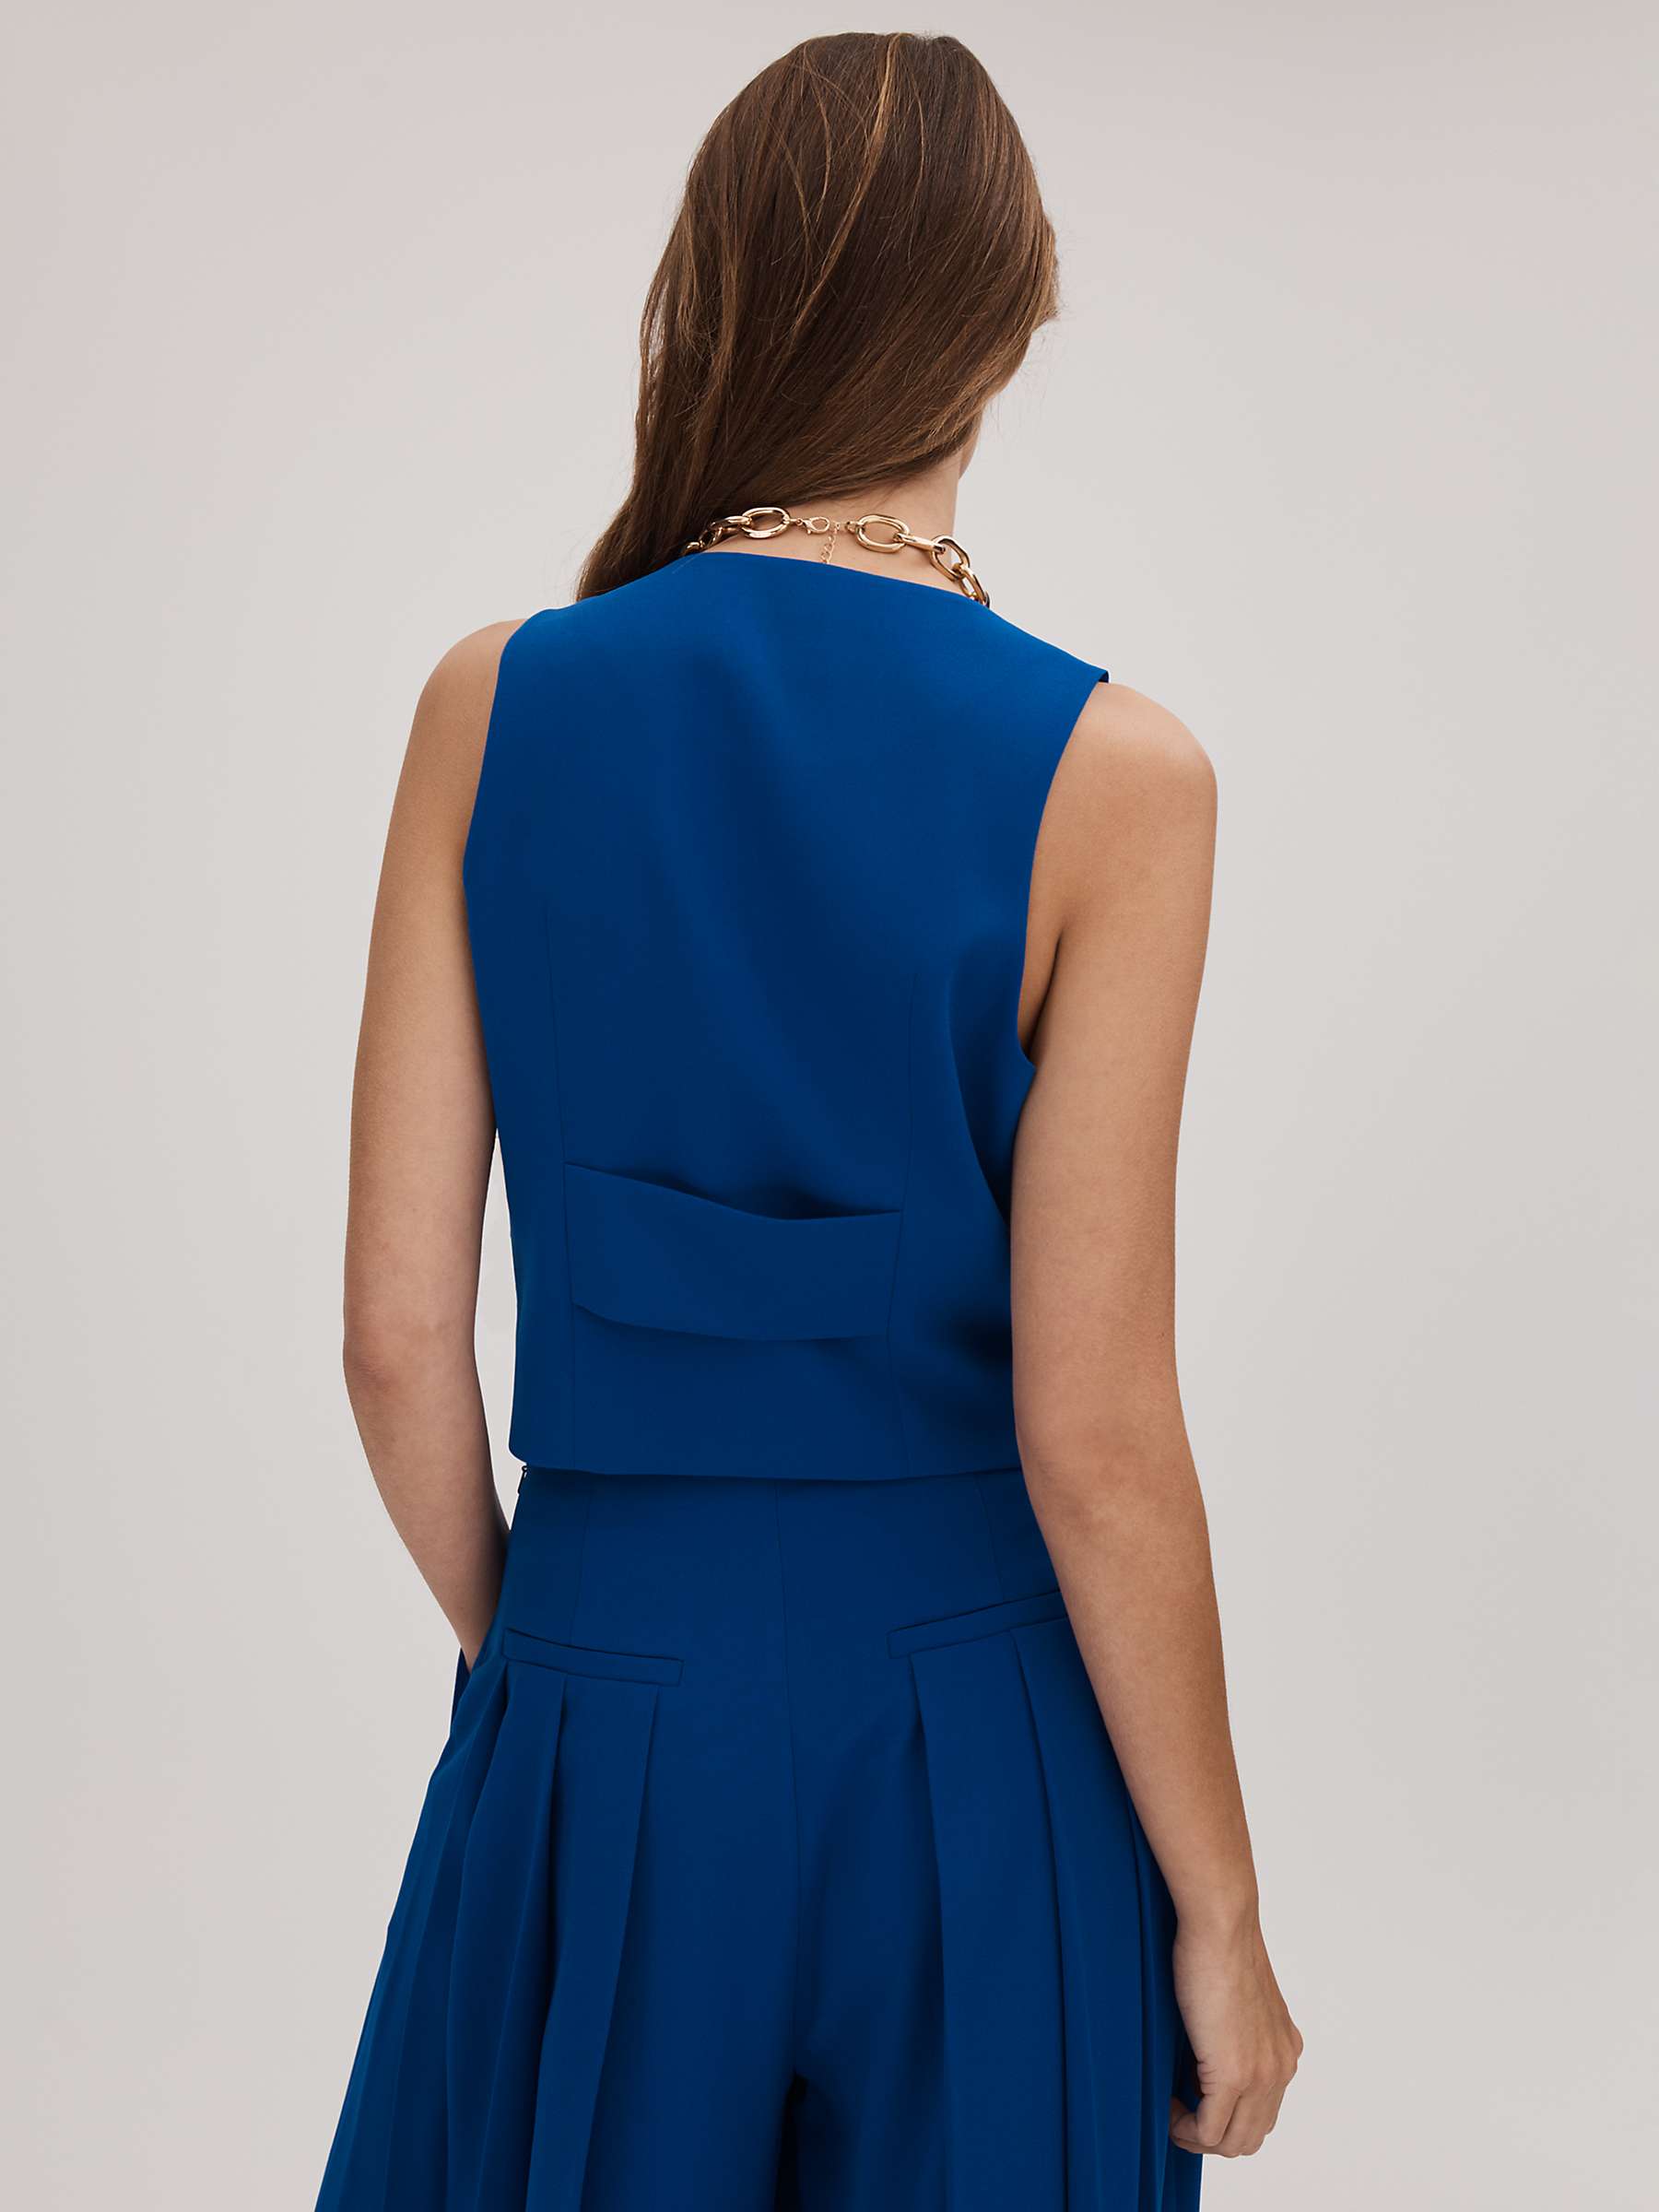 Buy FLORERE Tailored Waistcoat Online at johnlewis.com